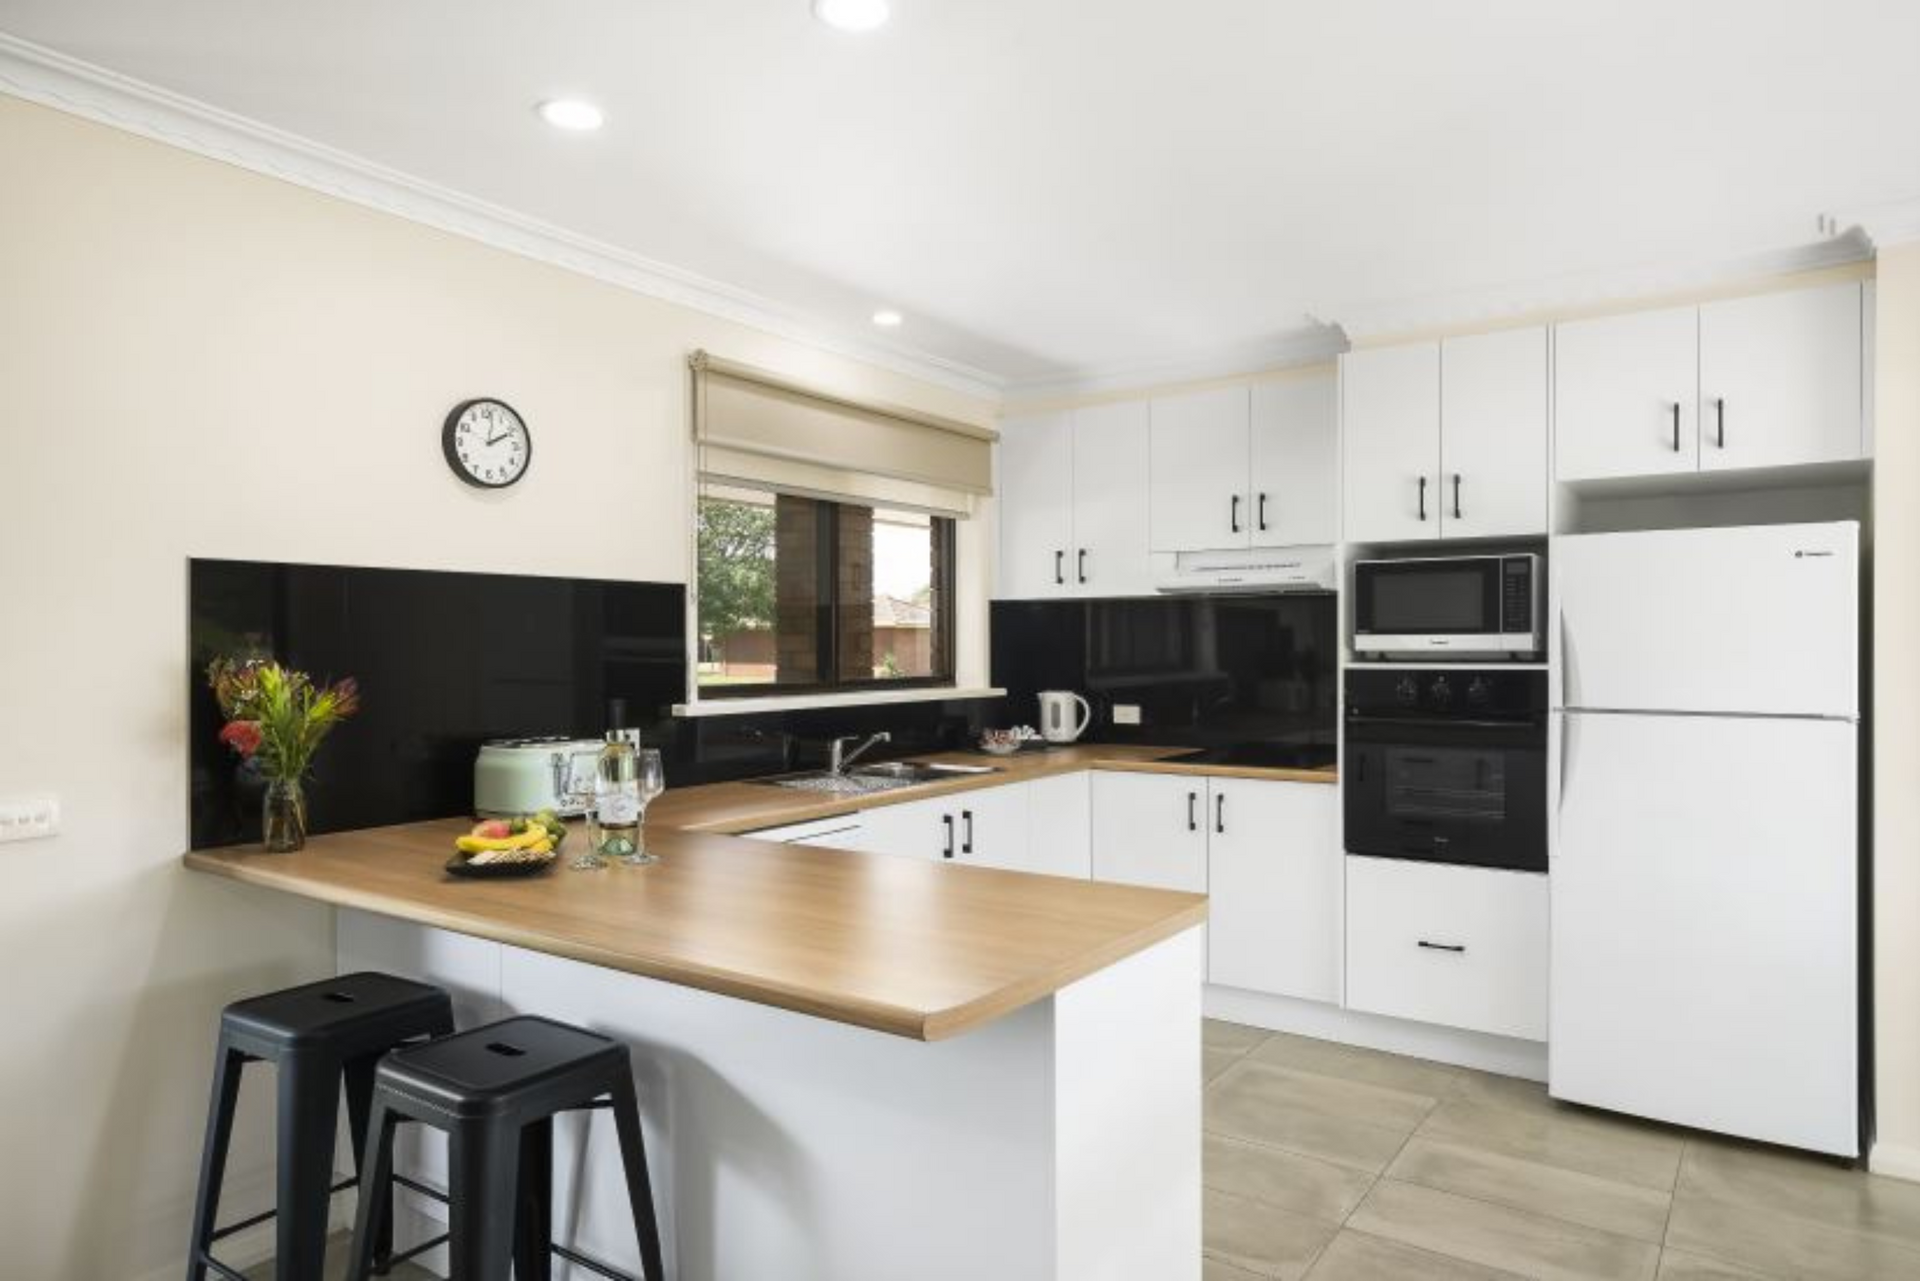 A kitchen with white cabinets and black stools and a clock on the wall.